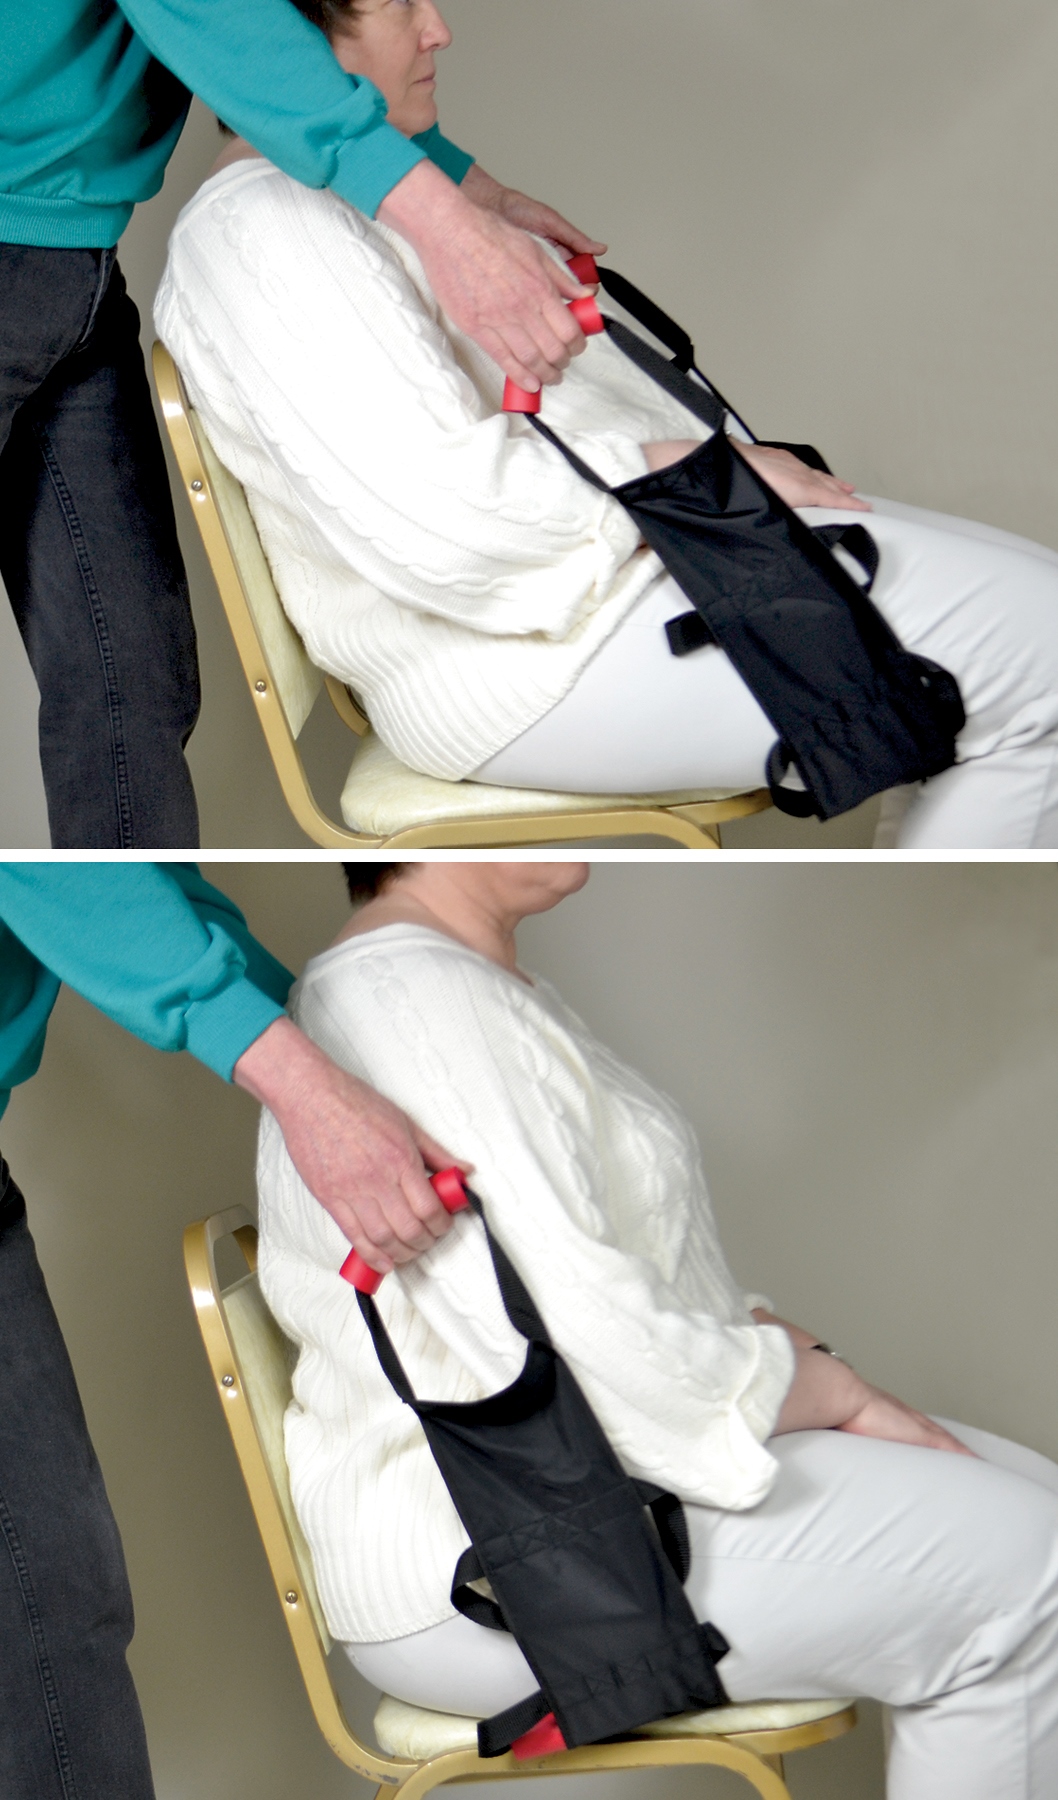 Ableware® Patient Slide Mobility Device Makes Repositioning Easier